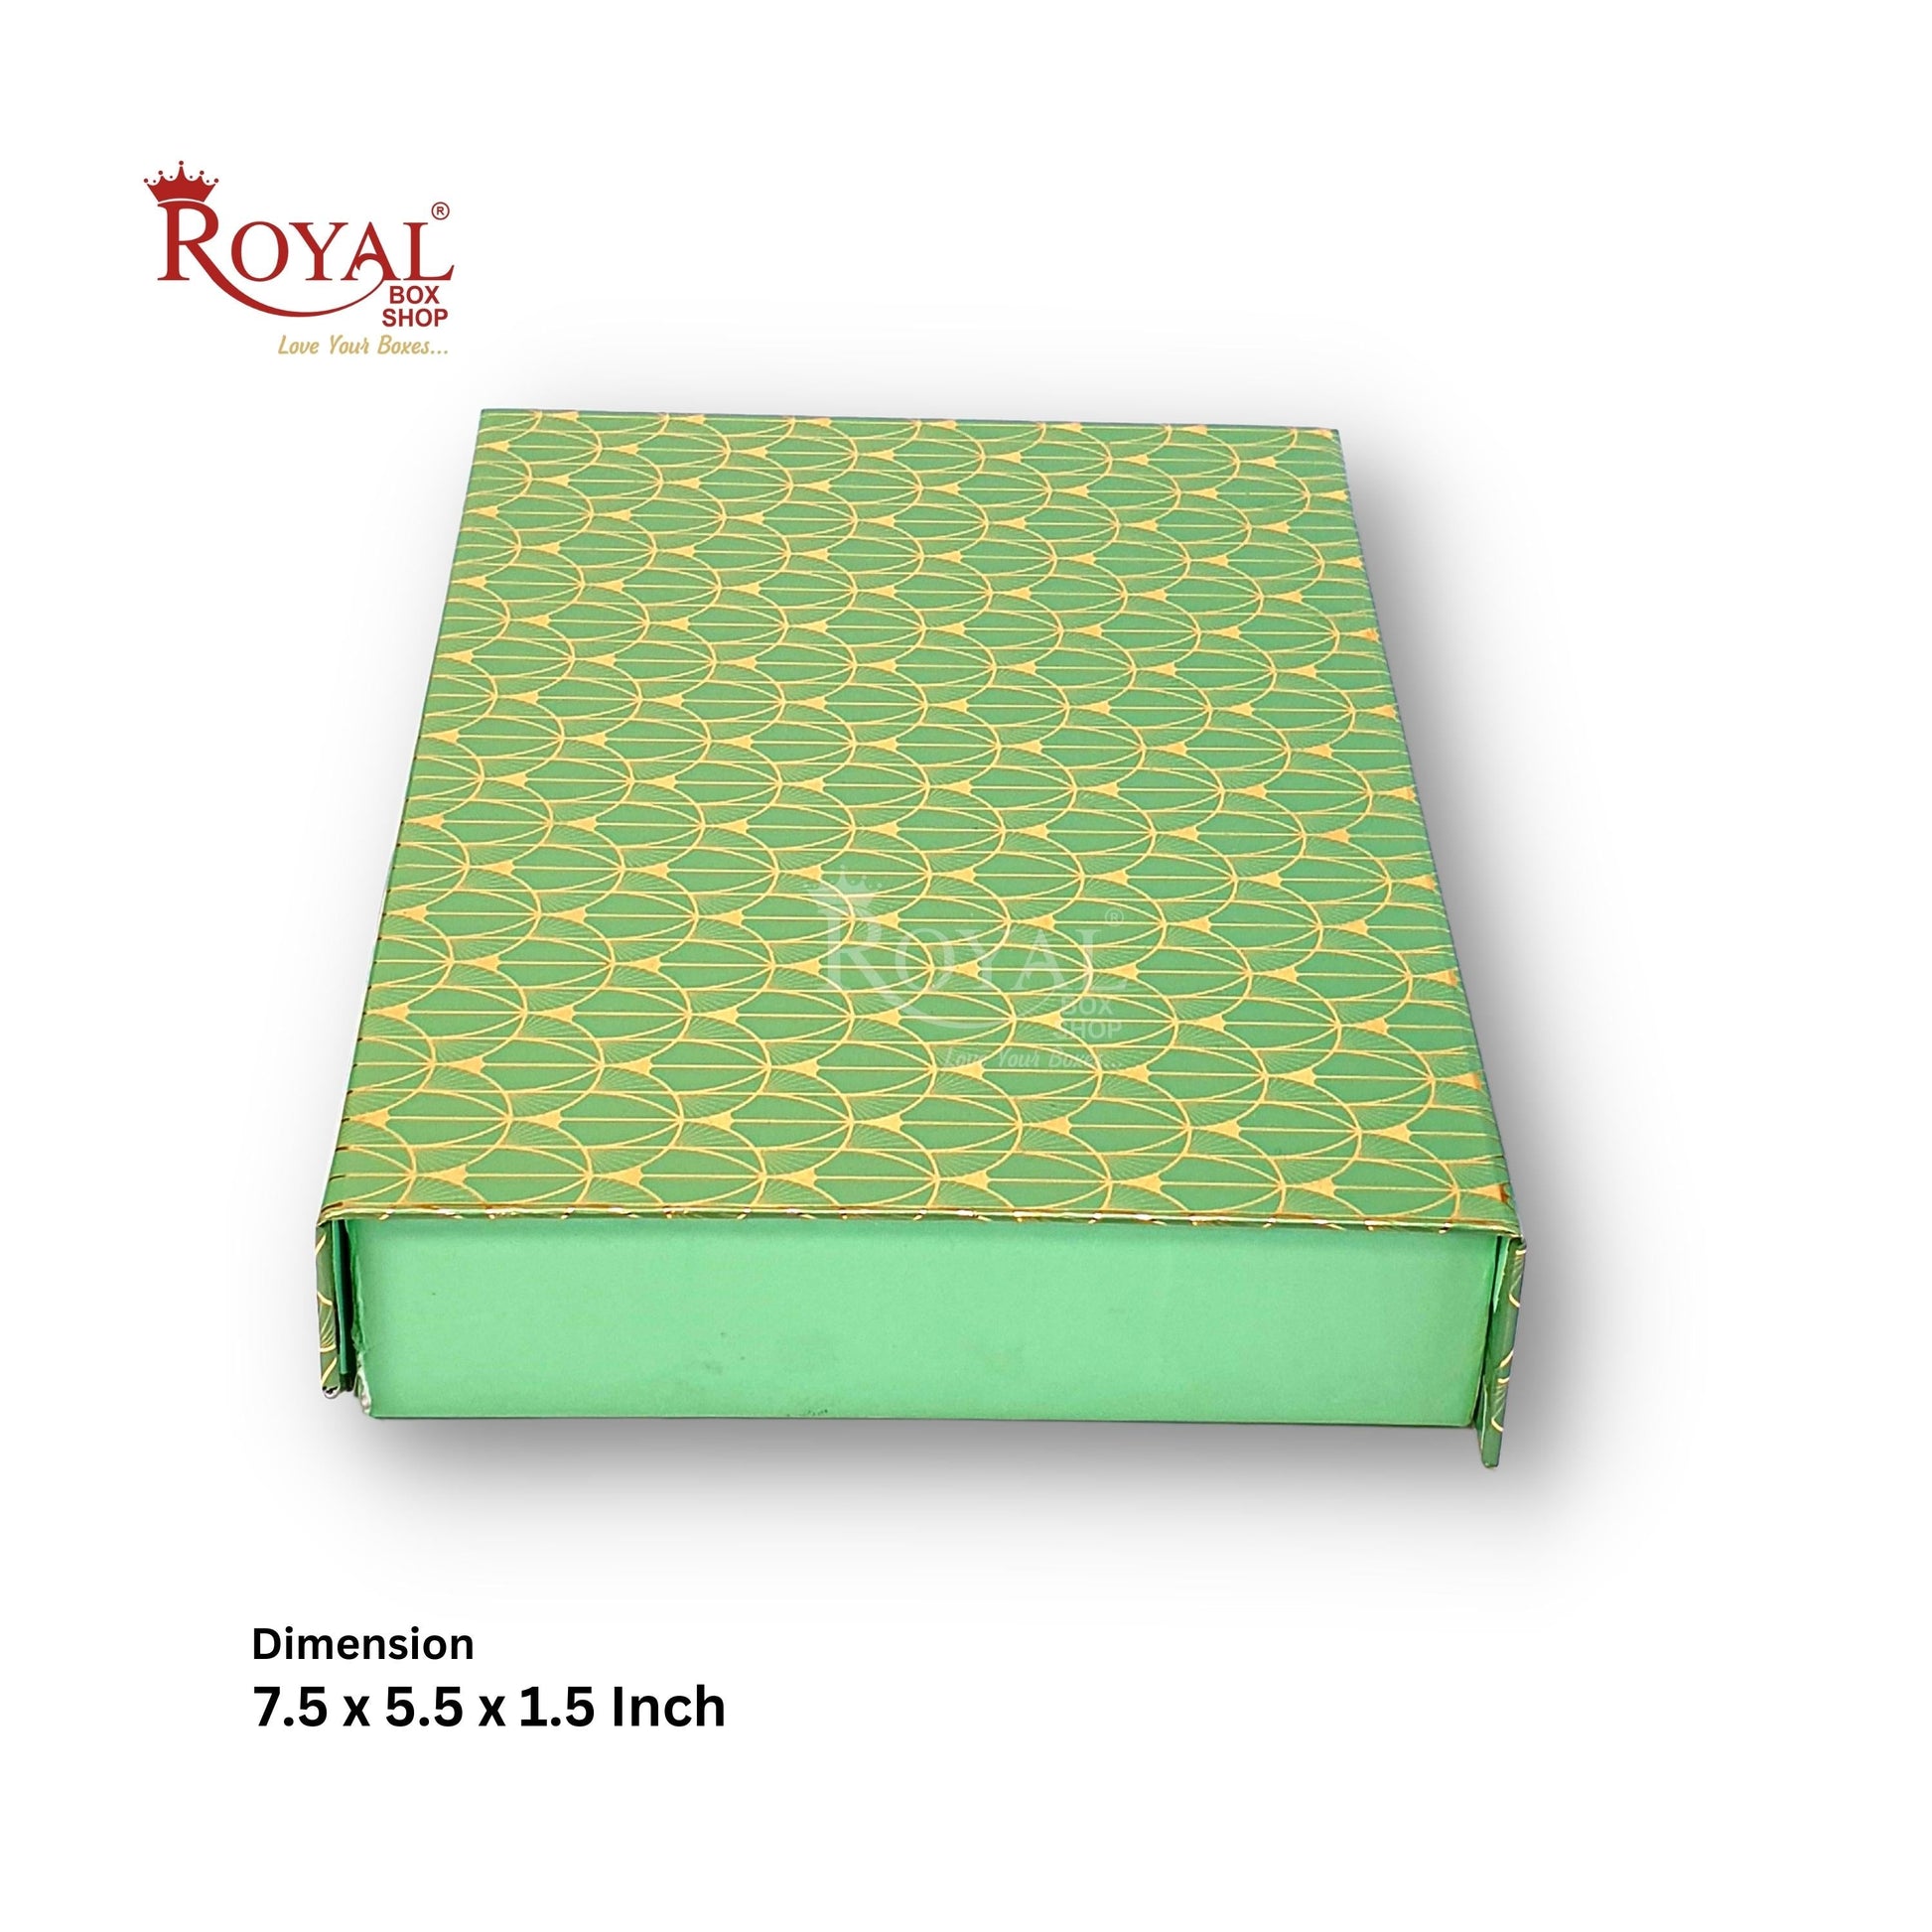 Rigid Chocolate Boxes 12 Cavity With Magnetic Flap I Green with Gold Foiling I 7.5 X 5.5 X 1.5 Inch I Kappa Boxes Royal Box Shop